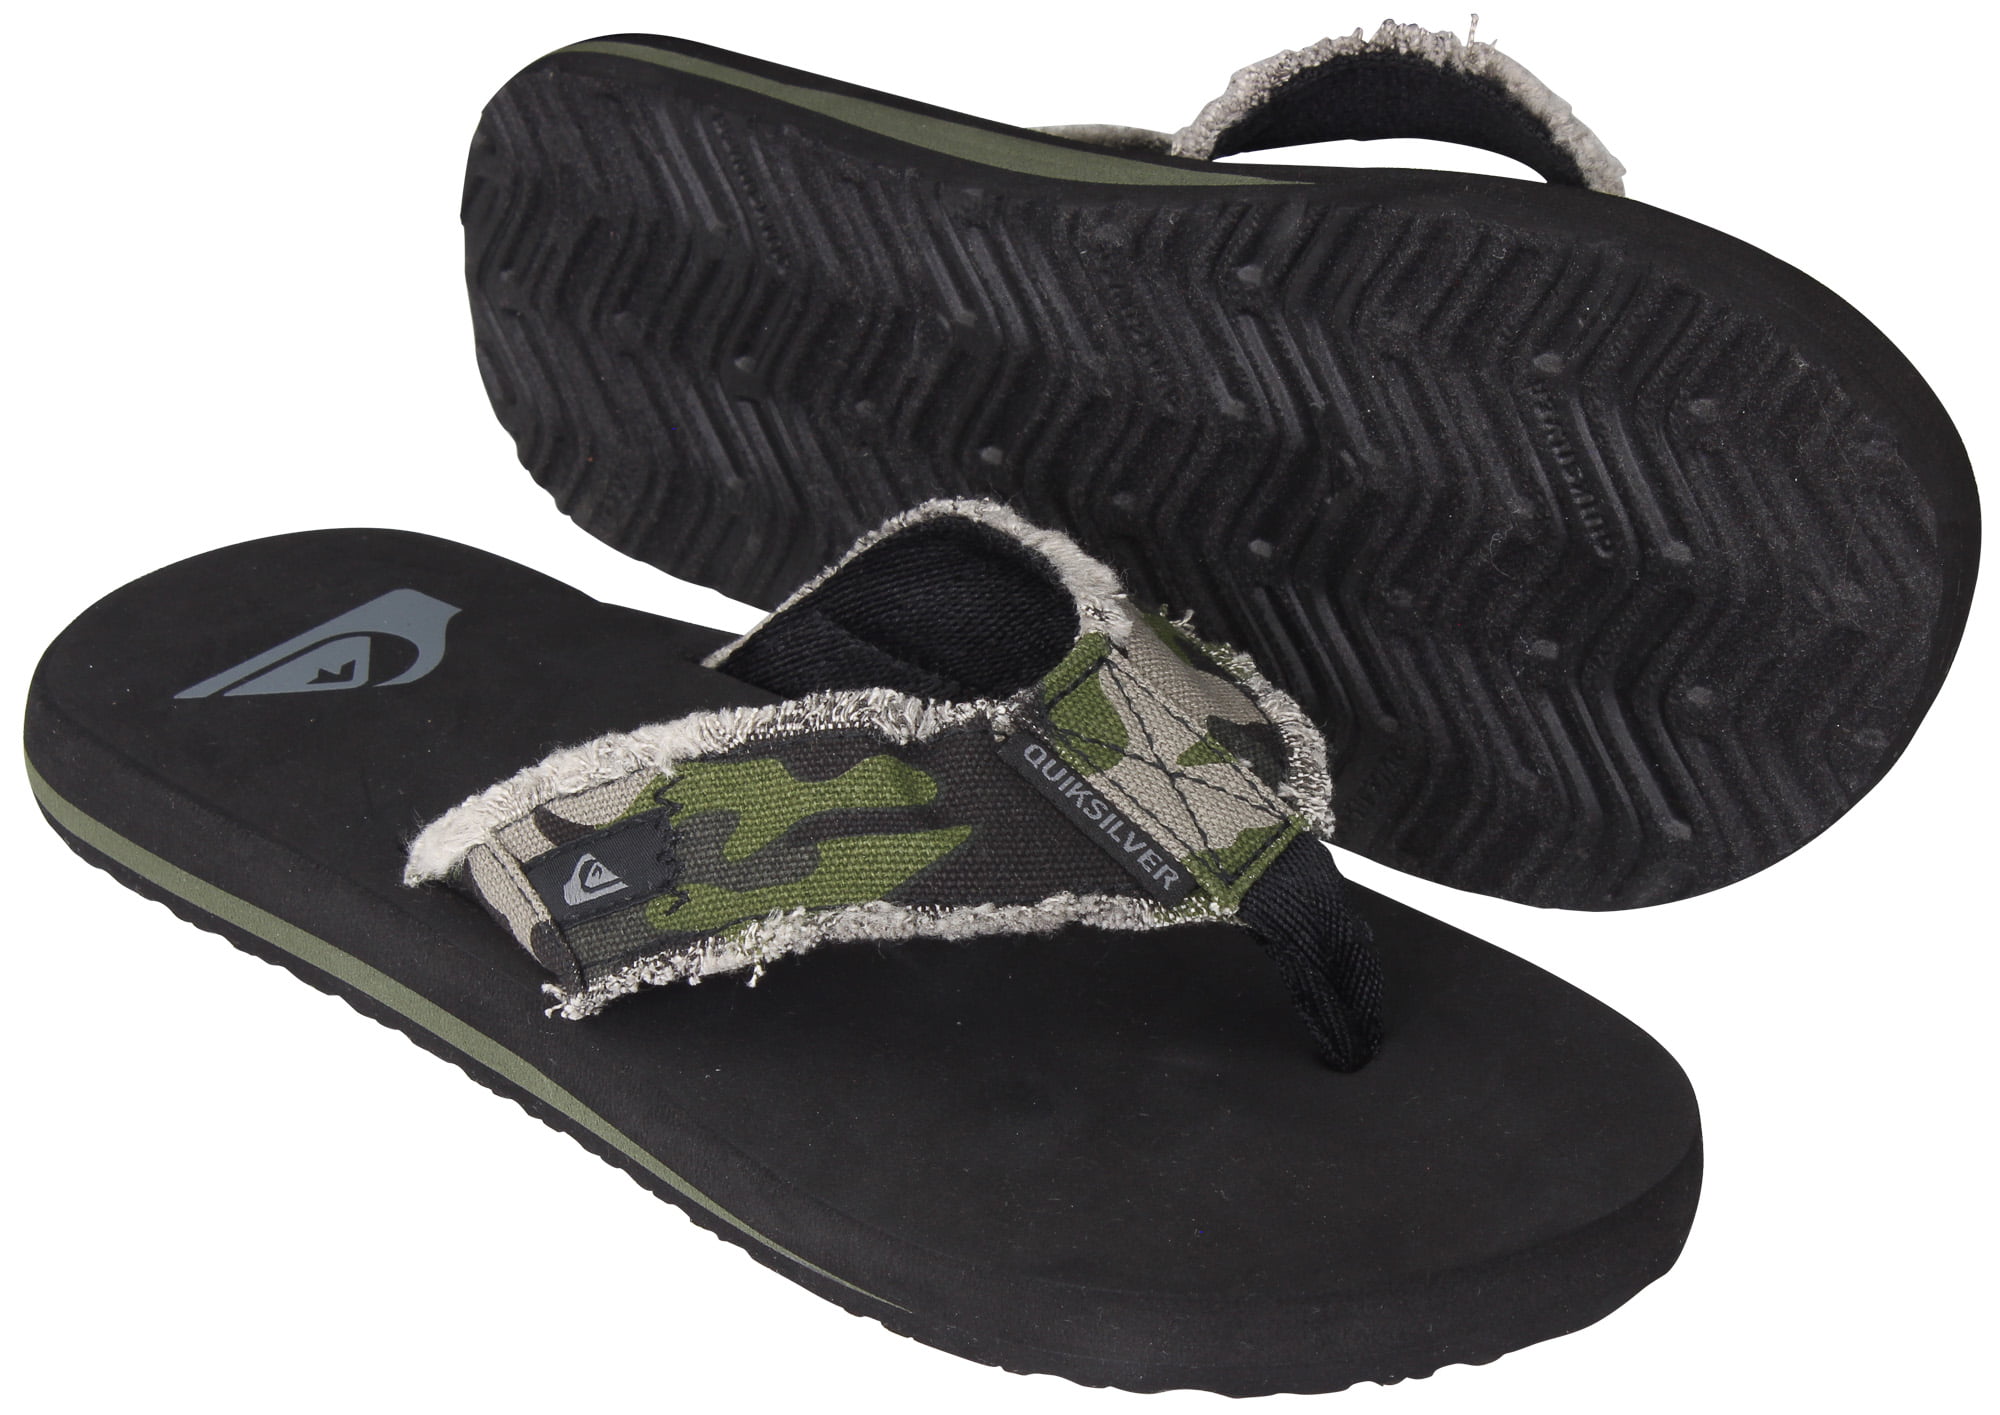 Quiksilver Mens Monkey Abyss Sandals - Black/Green Camo